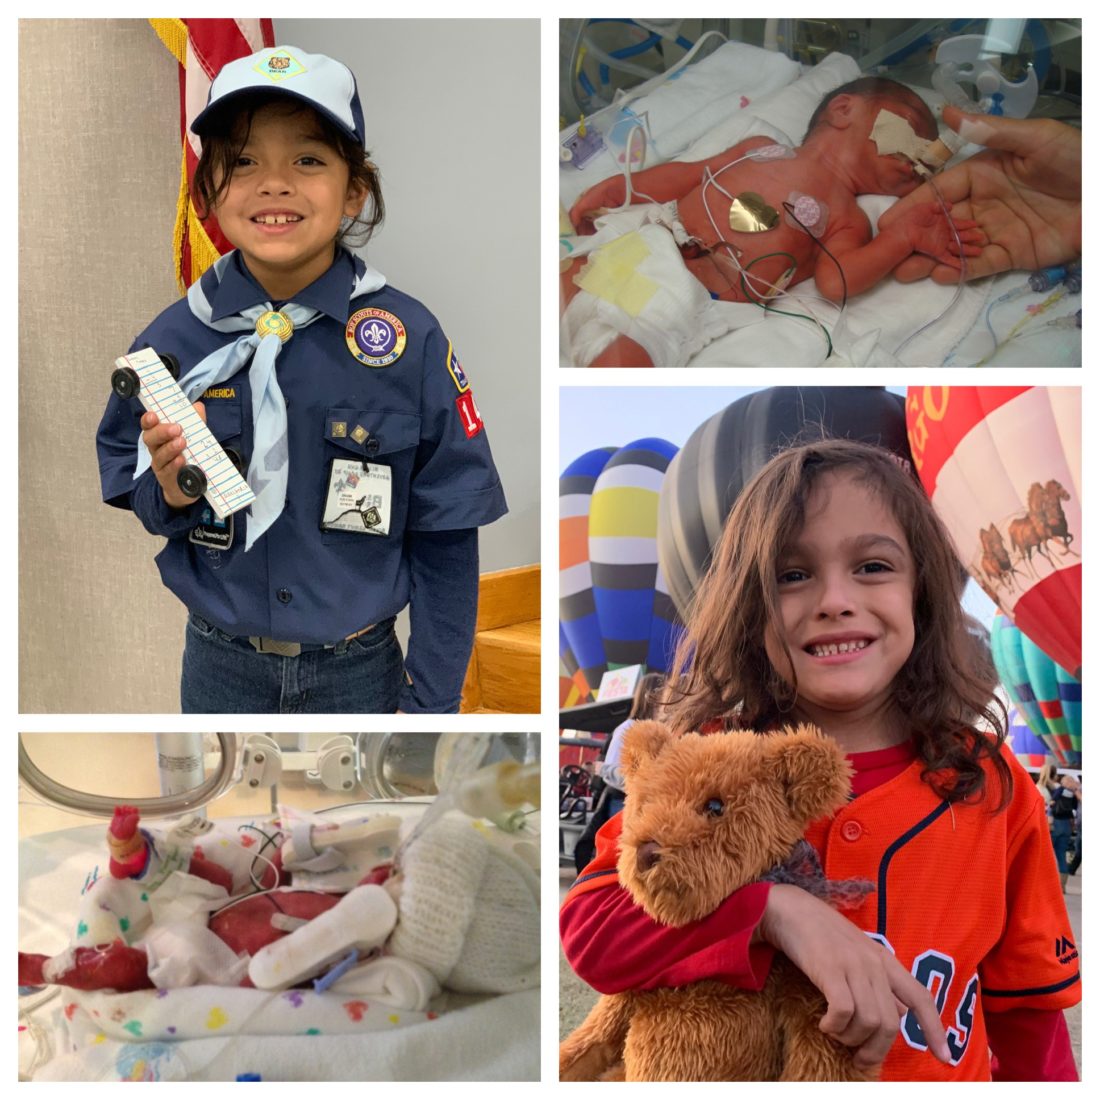 Collage of photos of two baby boys in the NICU and now at ages 8 and 10. 